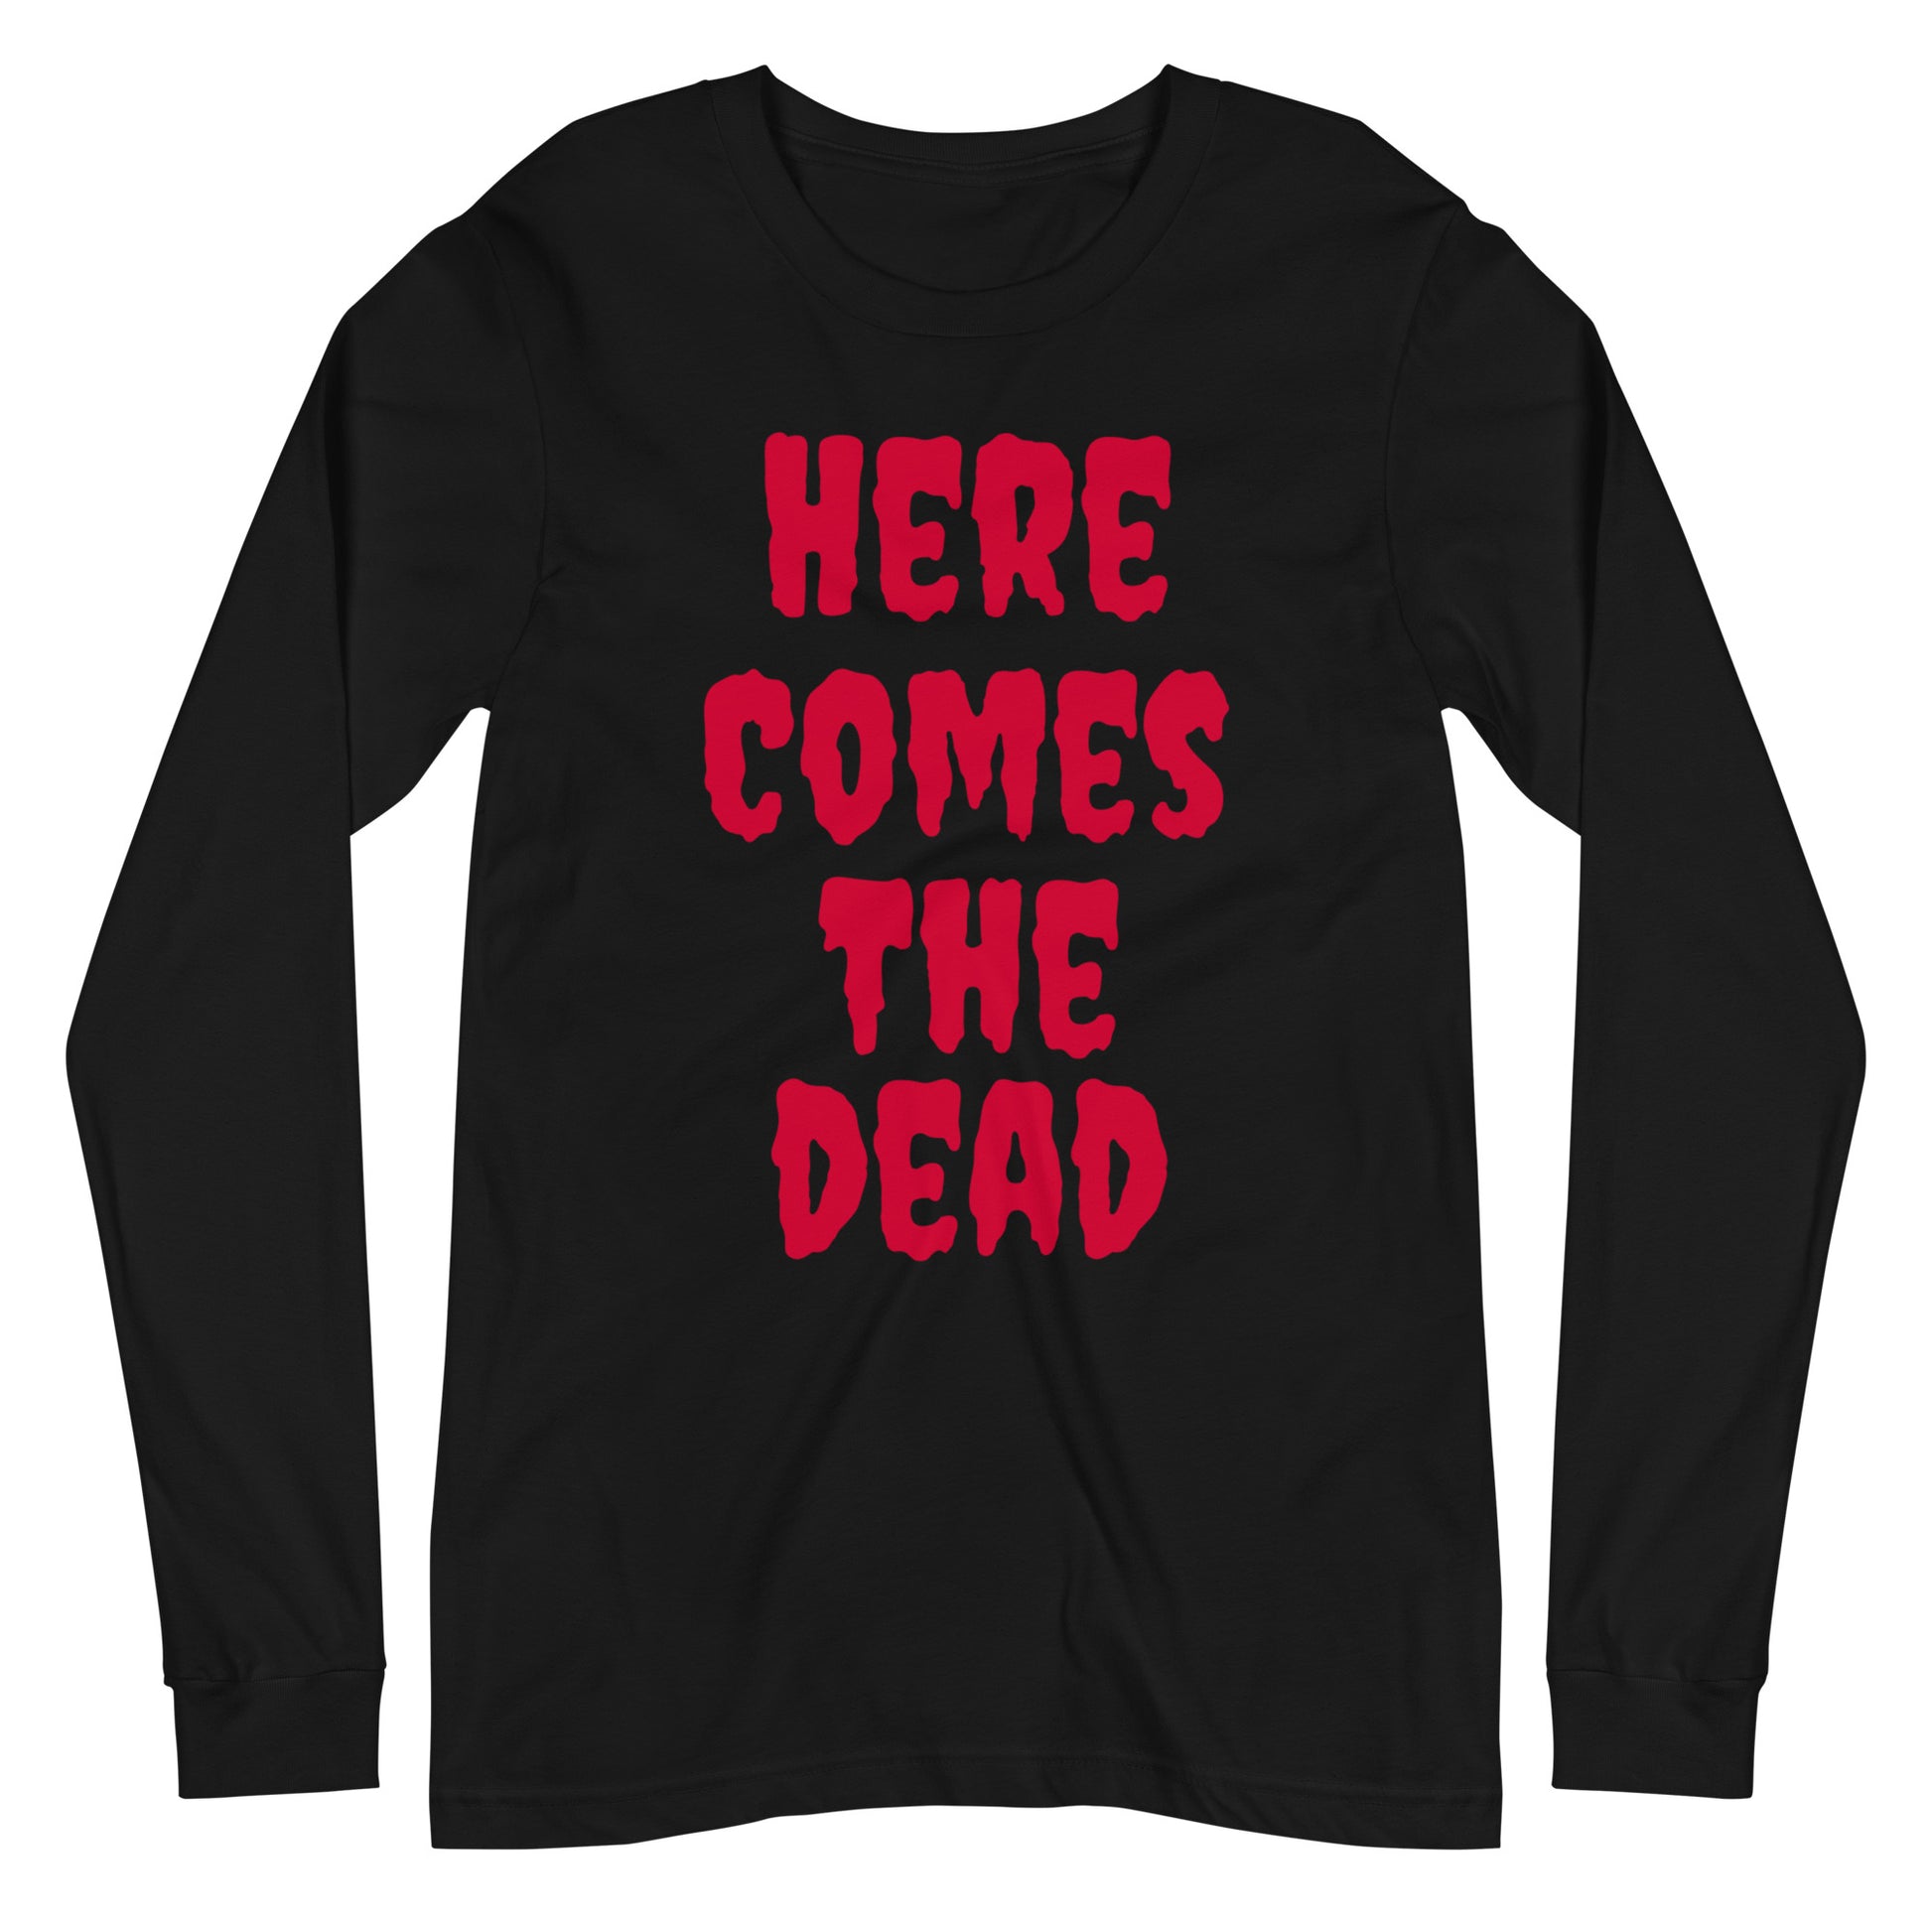 HERE COMES THE DEAD Unisex Long Sleeve Tee | rainandregret